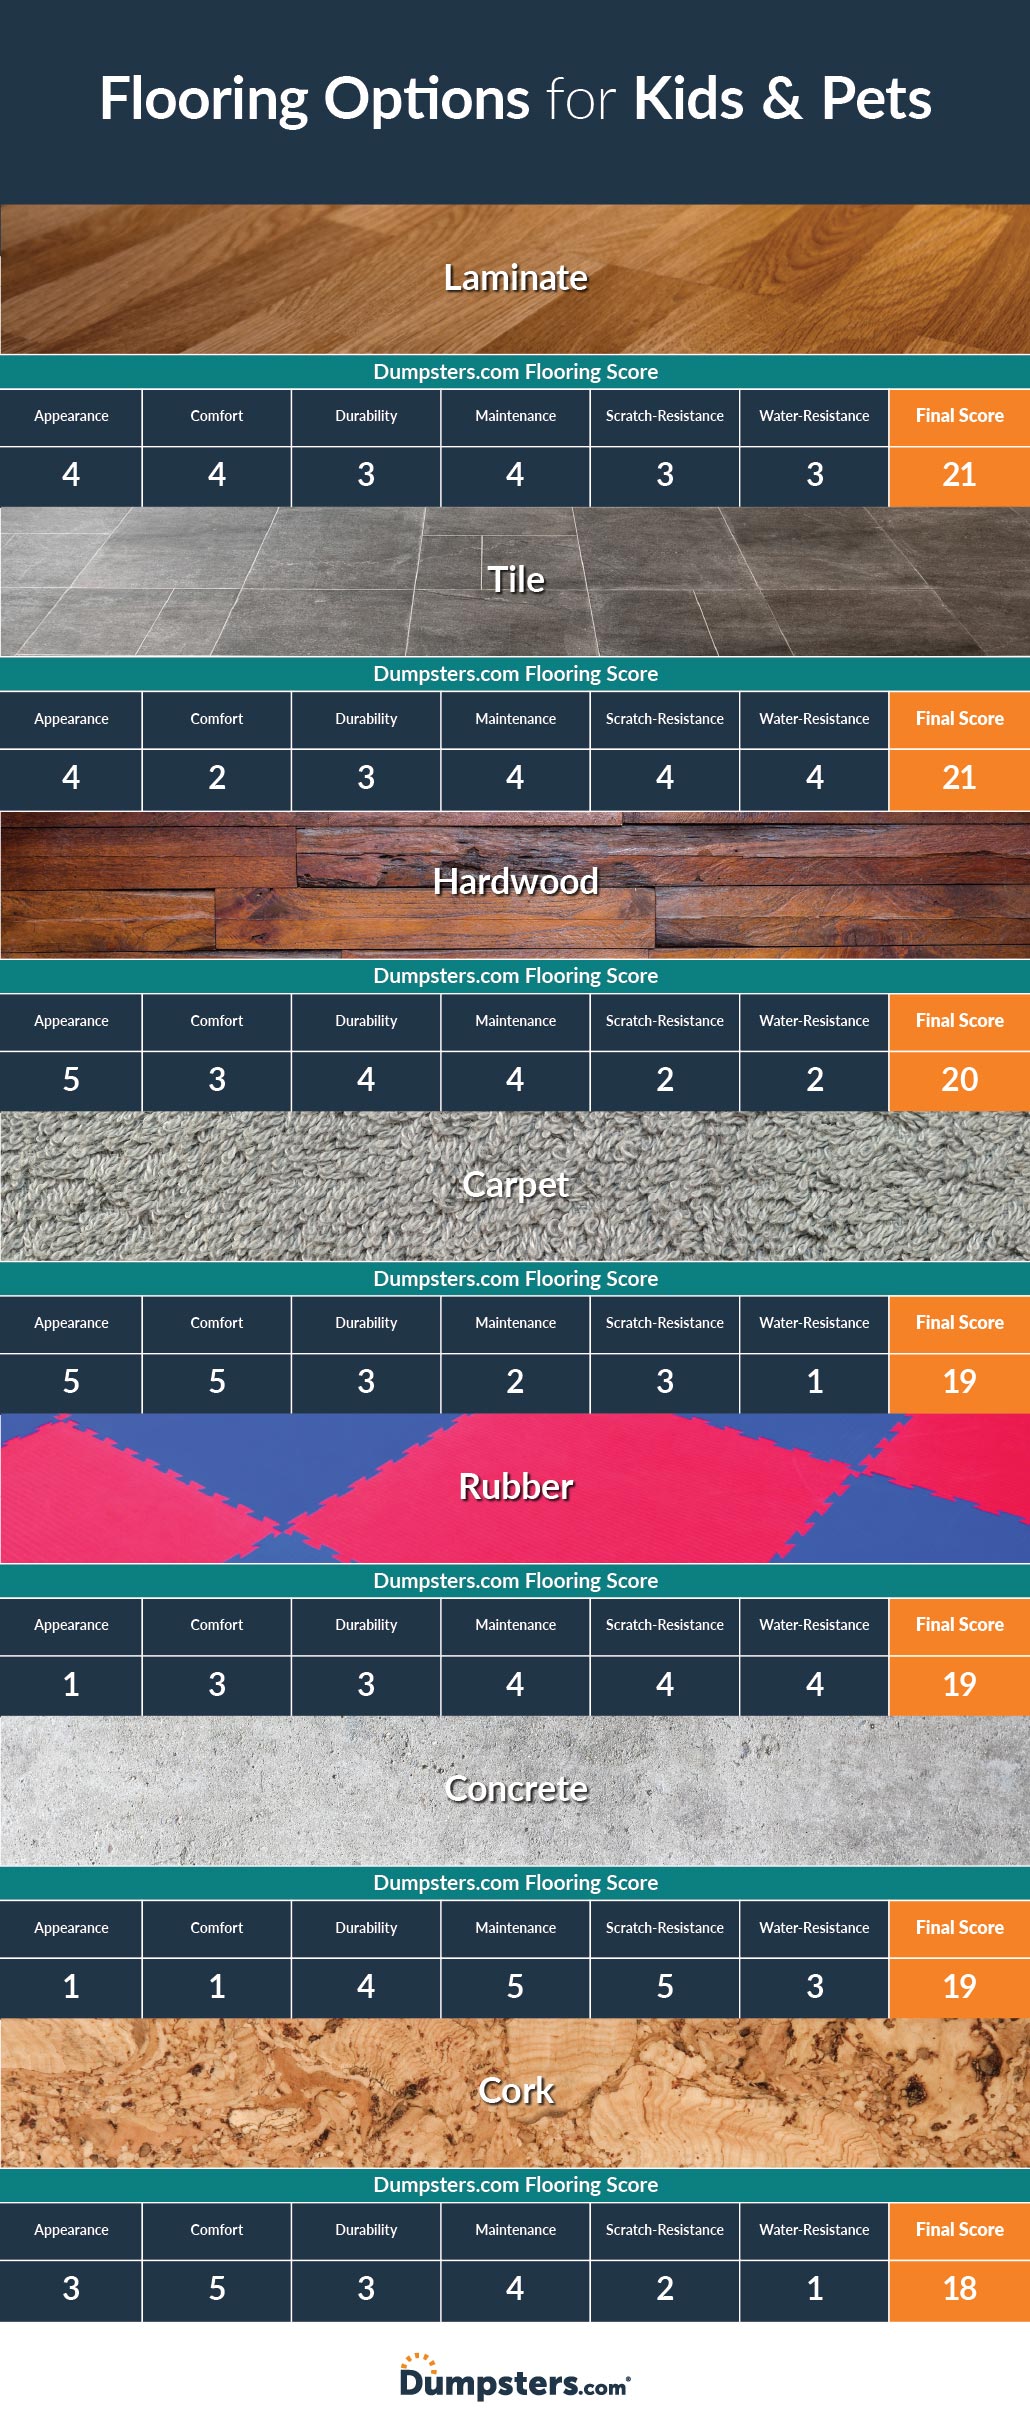 A Dumpsters.com infographic scoring the top flooring options for families with kids and pets, with scores out of 30 possible points: Laminate (21), Tile (21), Hardwood (20), Carpet (19), Rubber (19), Concrete (19), Cork (18).